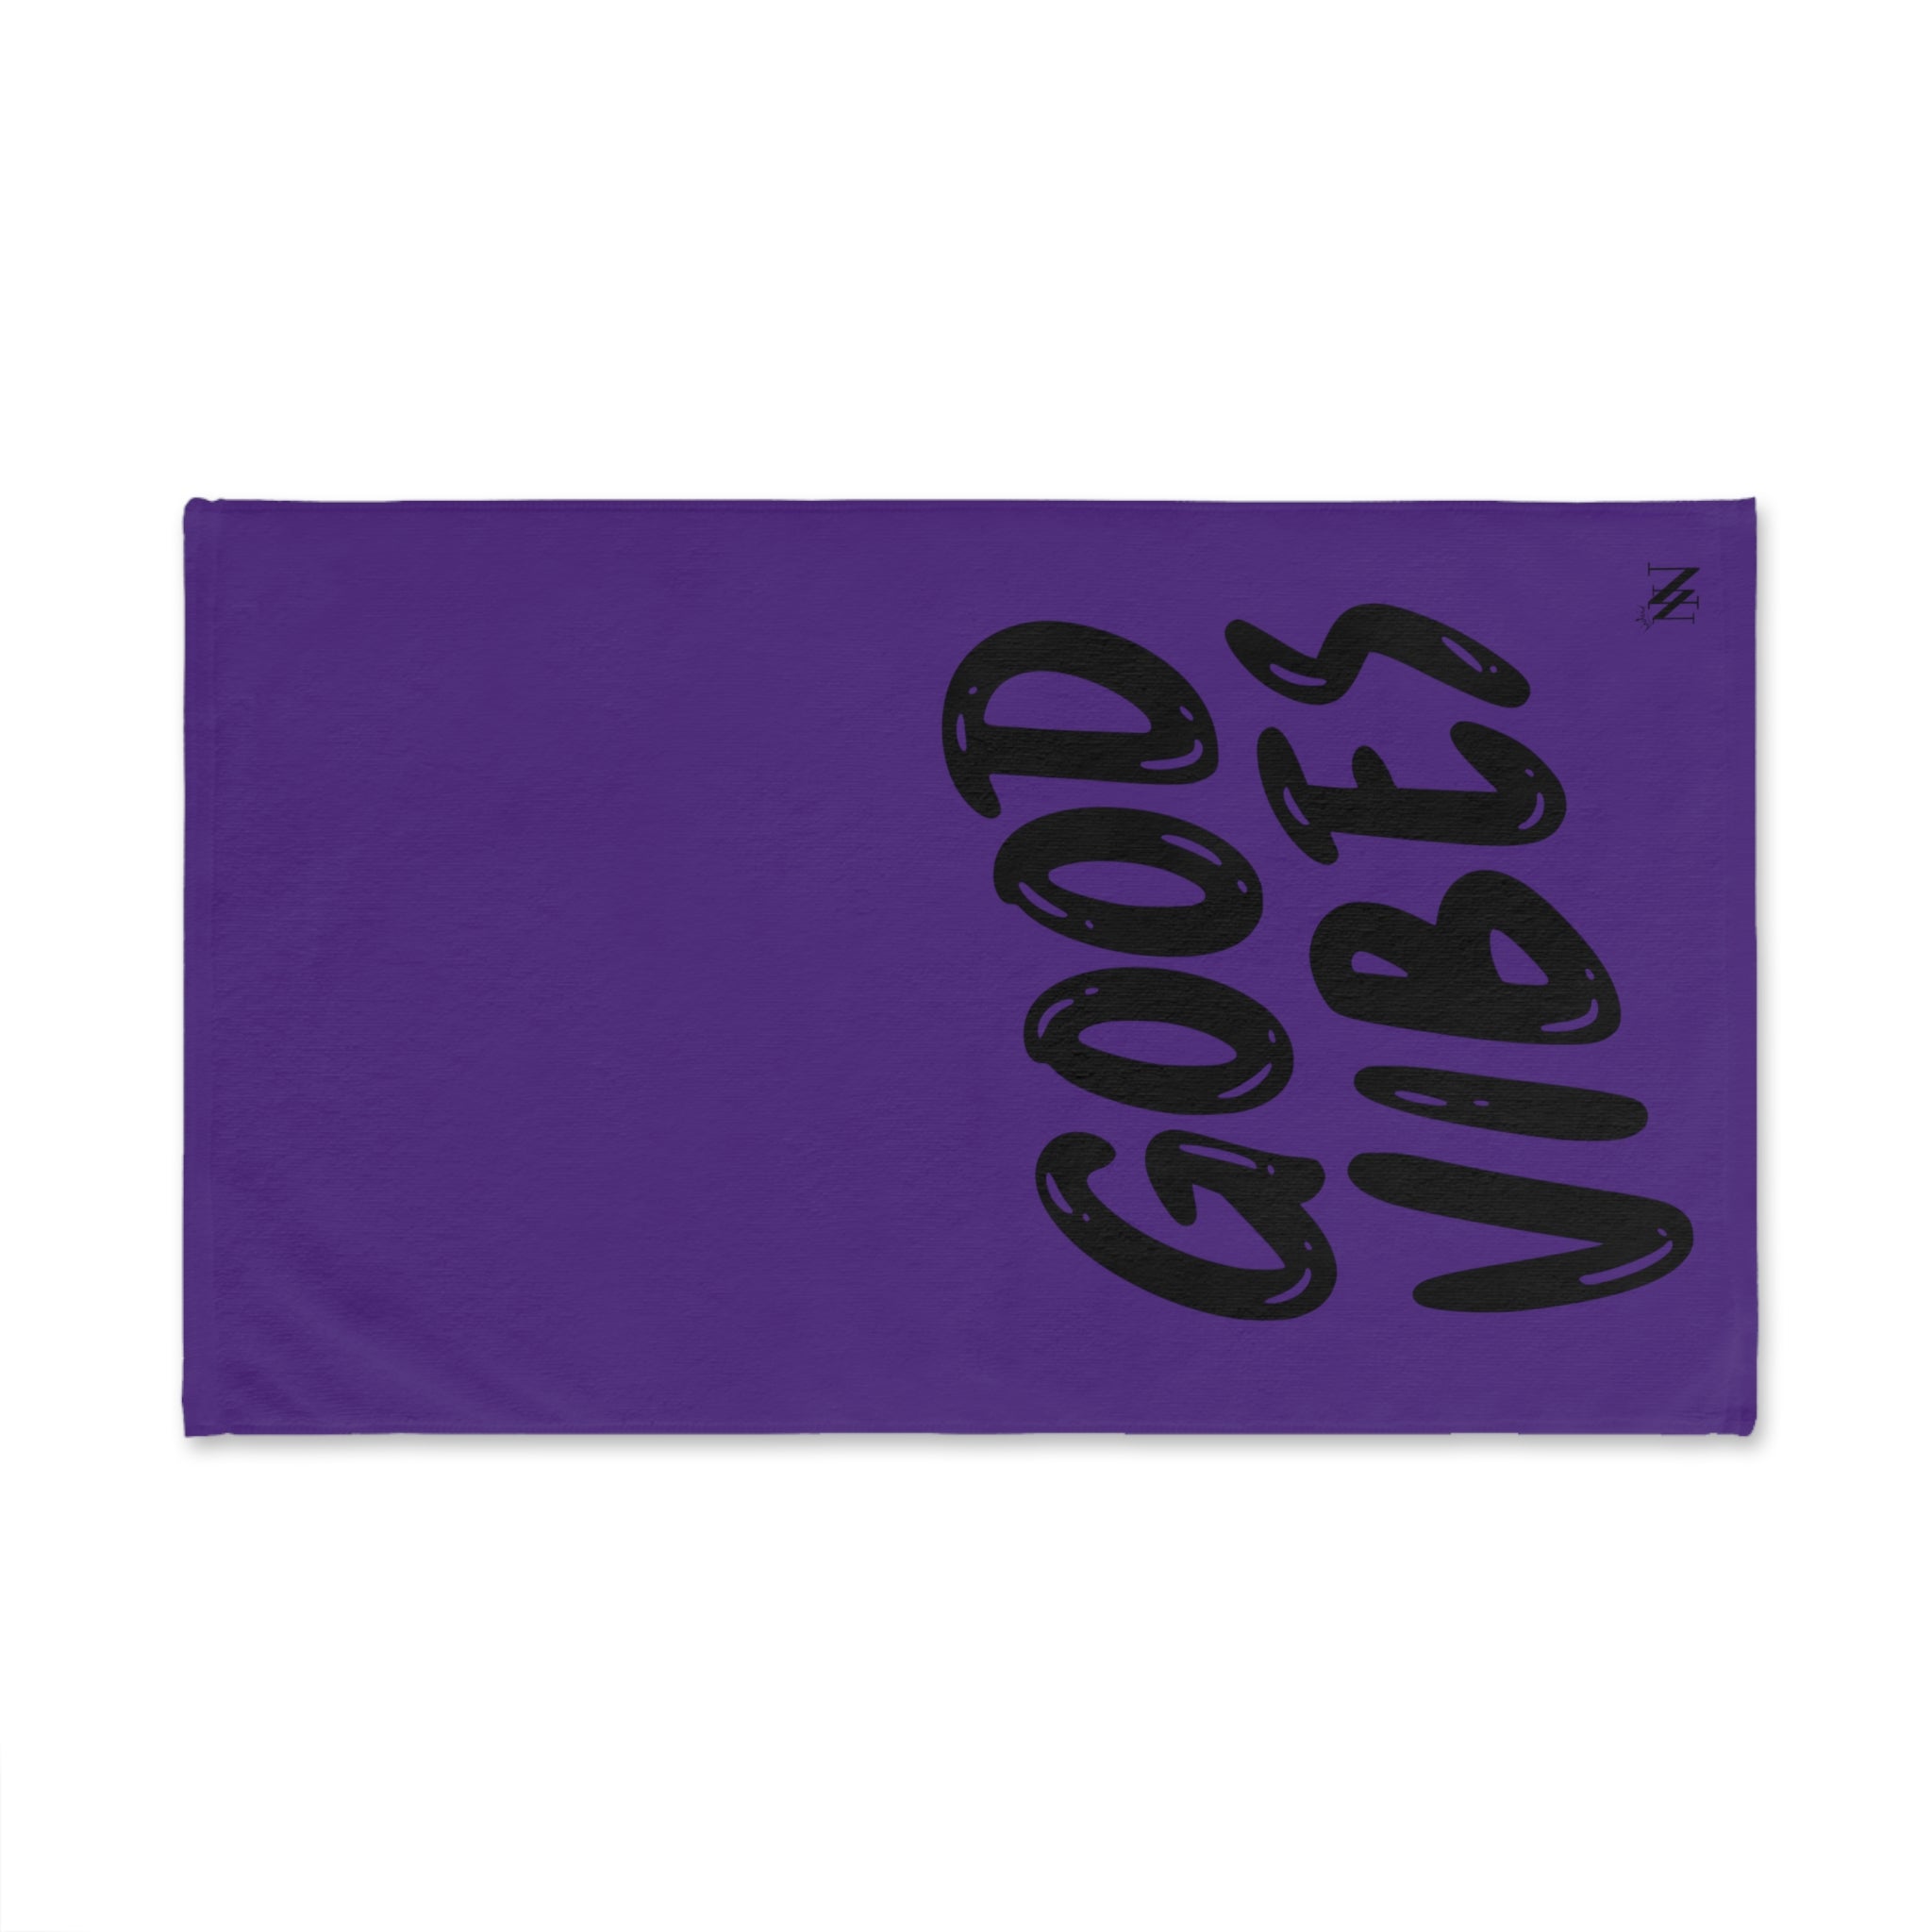 Good Vibes Bubble Purple | Funny Gifts for Men - Gifts for Him - Birthday Gifts for Men, Him, Husband, Boyfriend, New Couple Gifts, Fathers & Valentines Day Gifts, Christmas Gifts NECTAR NAPKINS